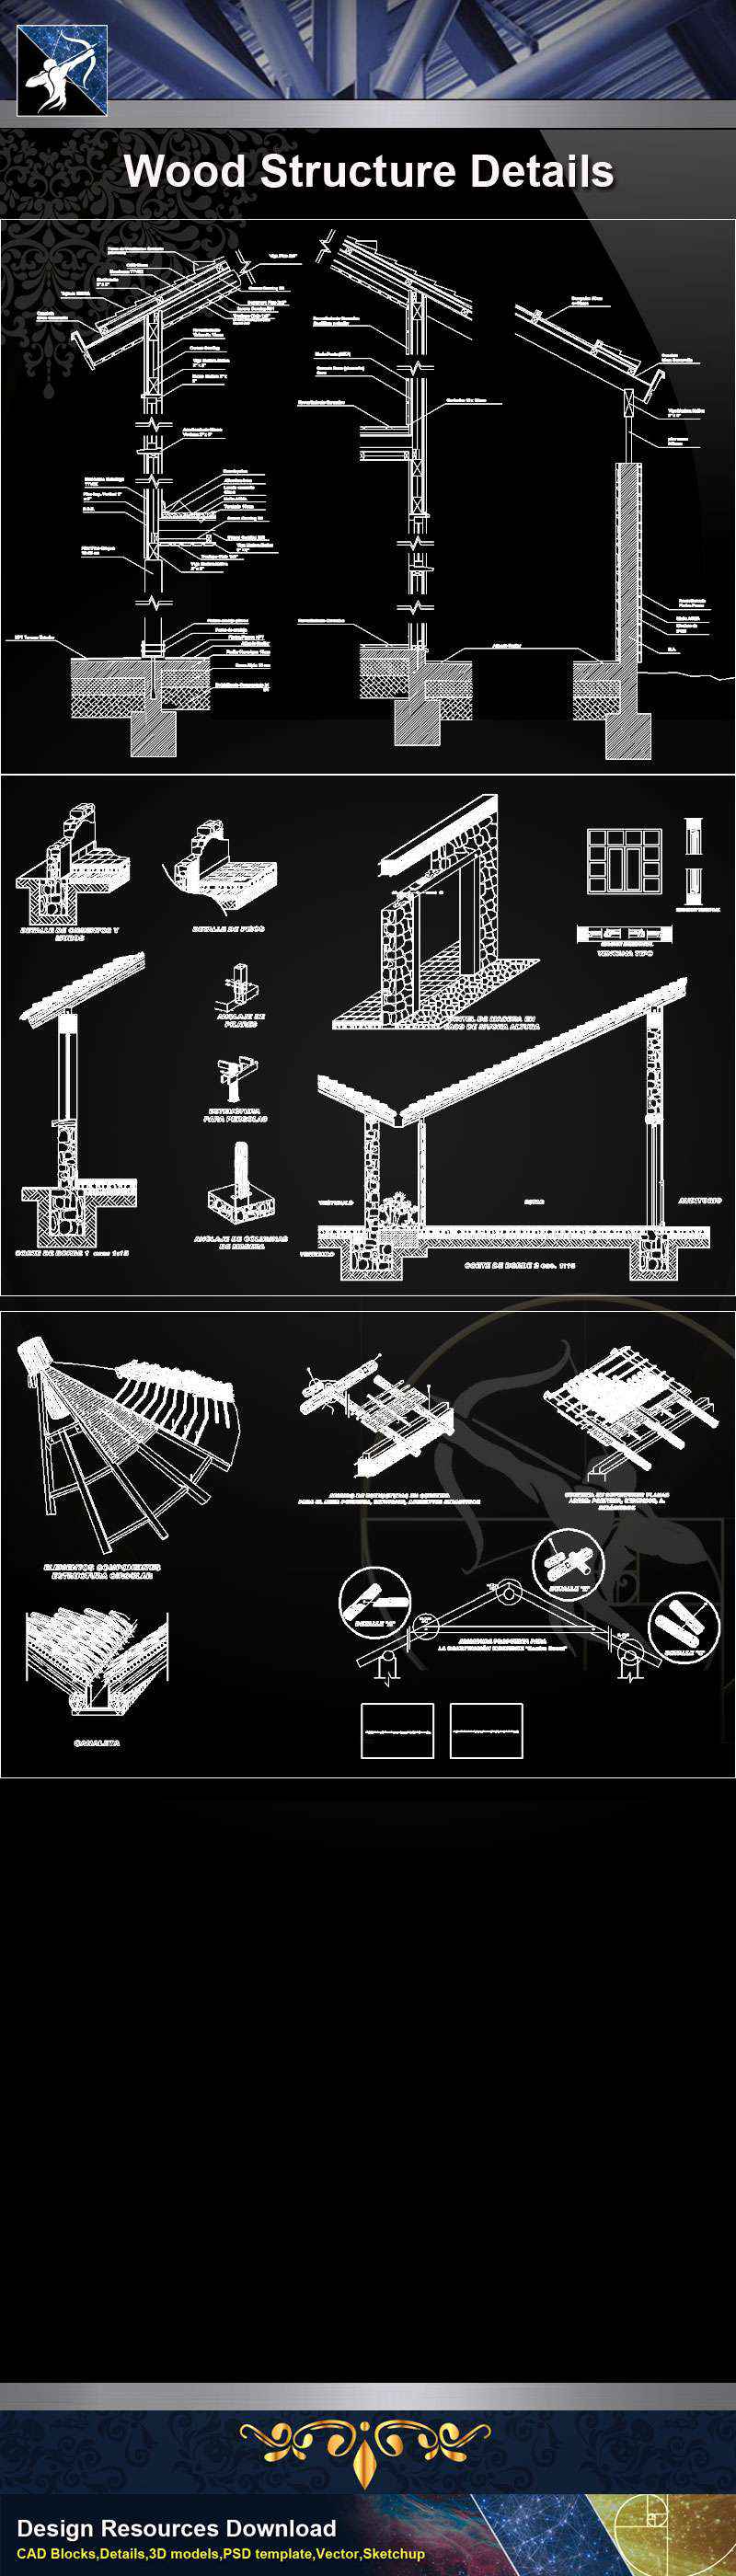 【Architecture CAD Details Collections】Wood Structure CAD Details (Recommand)